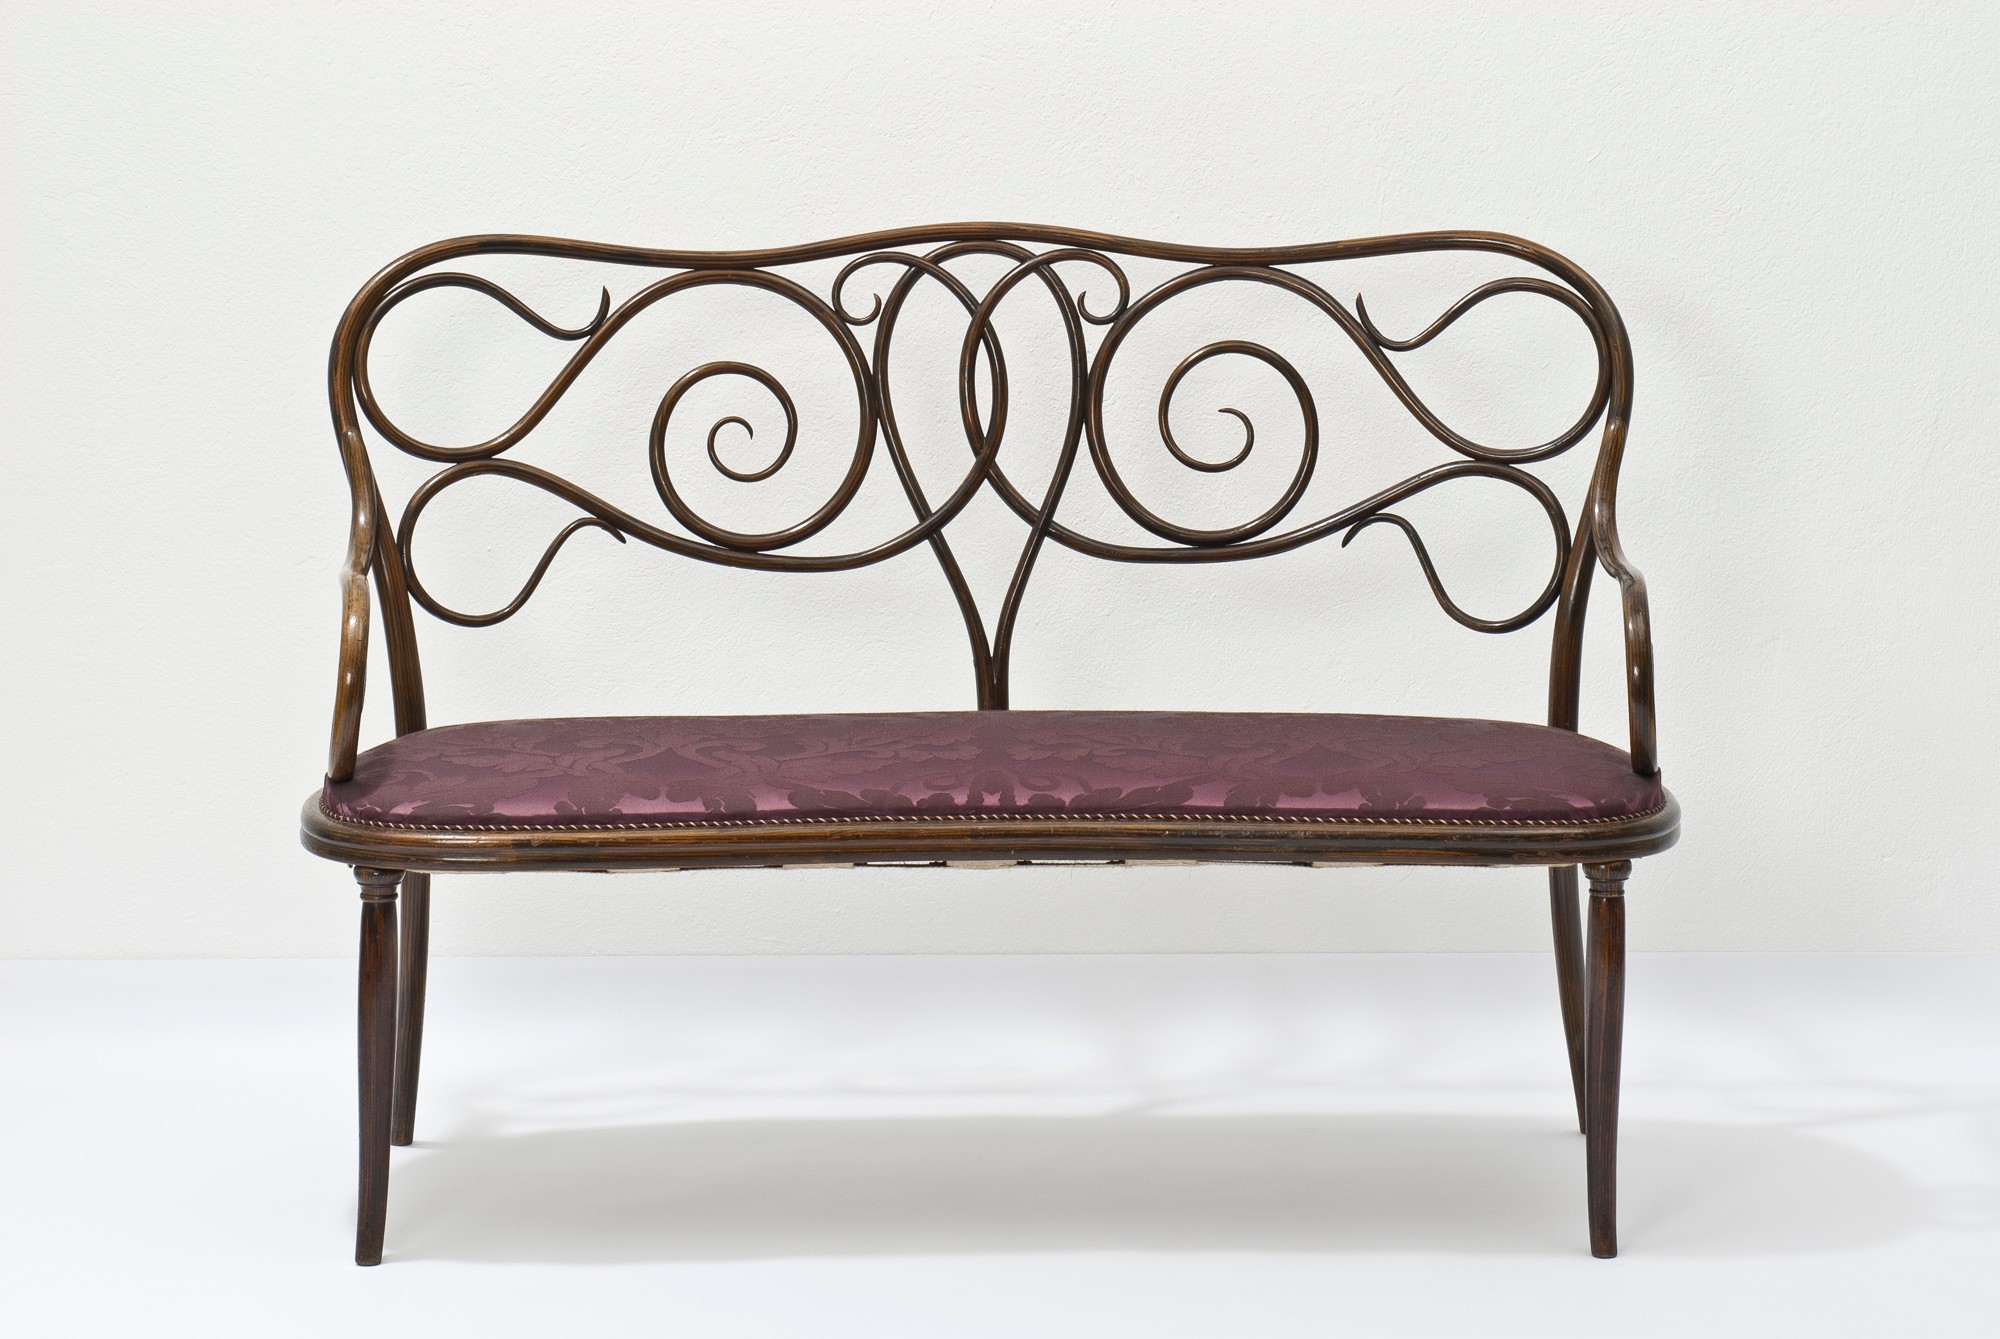 <BODY><div>SOFA, MODEL NO. 4</div><div>Vienna, ca. 1850</div><div>Manufacture: Thonet Brothers, ca. 1858/1860</div><div>Beechwood, partly laminated and bent, rosewood-stained, damask upholstery (renewed)</div><div>H 2978 / 1988, formerly Alexander von Vegesack Collection</div></BODY>